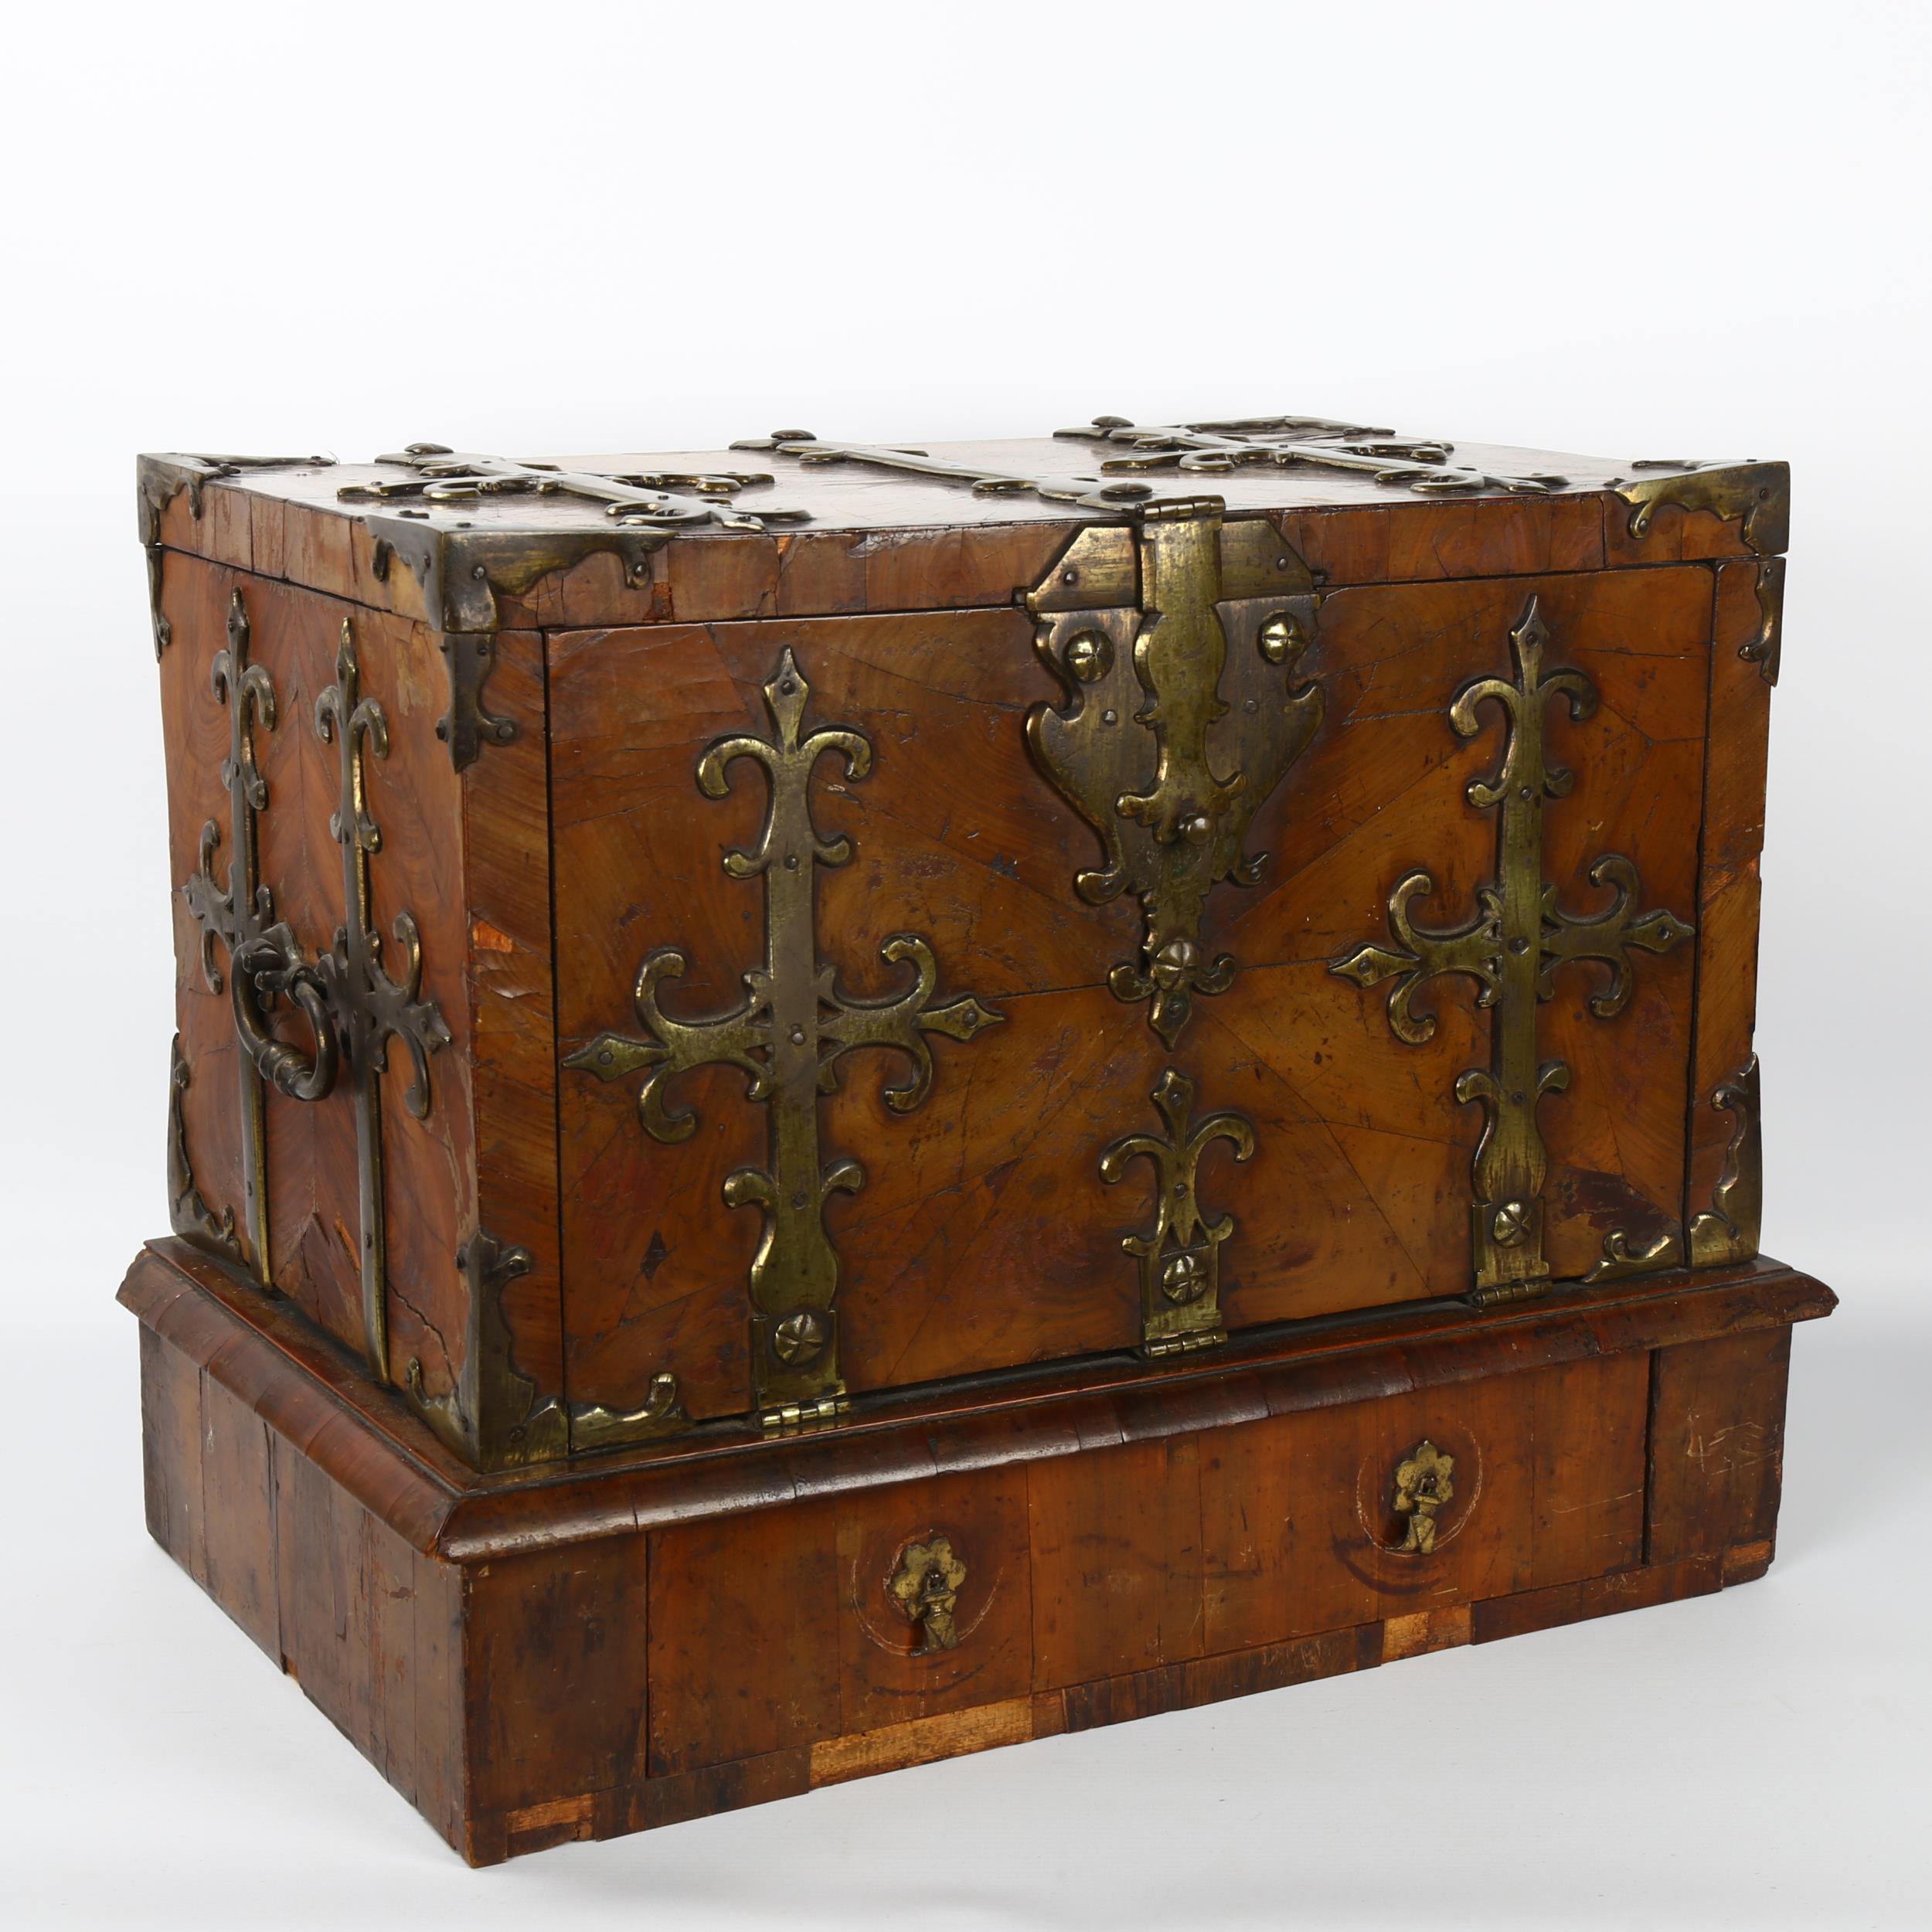 A small 18th century Gothic brass-bound walnut travelling chest, allover heavy brass strapwork - Image 2 of 6